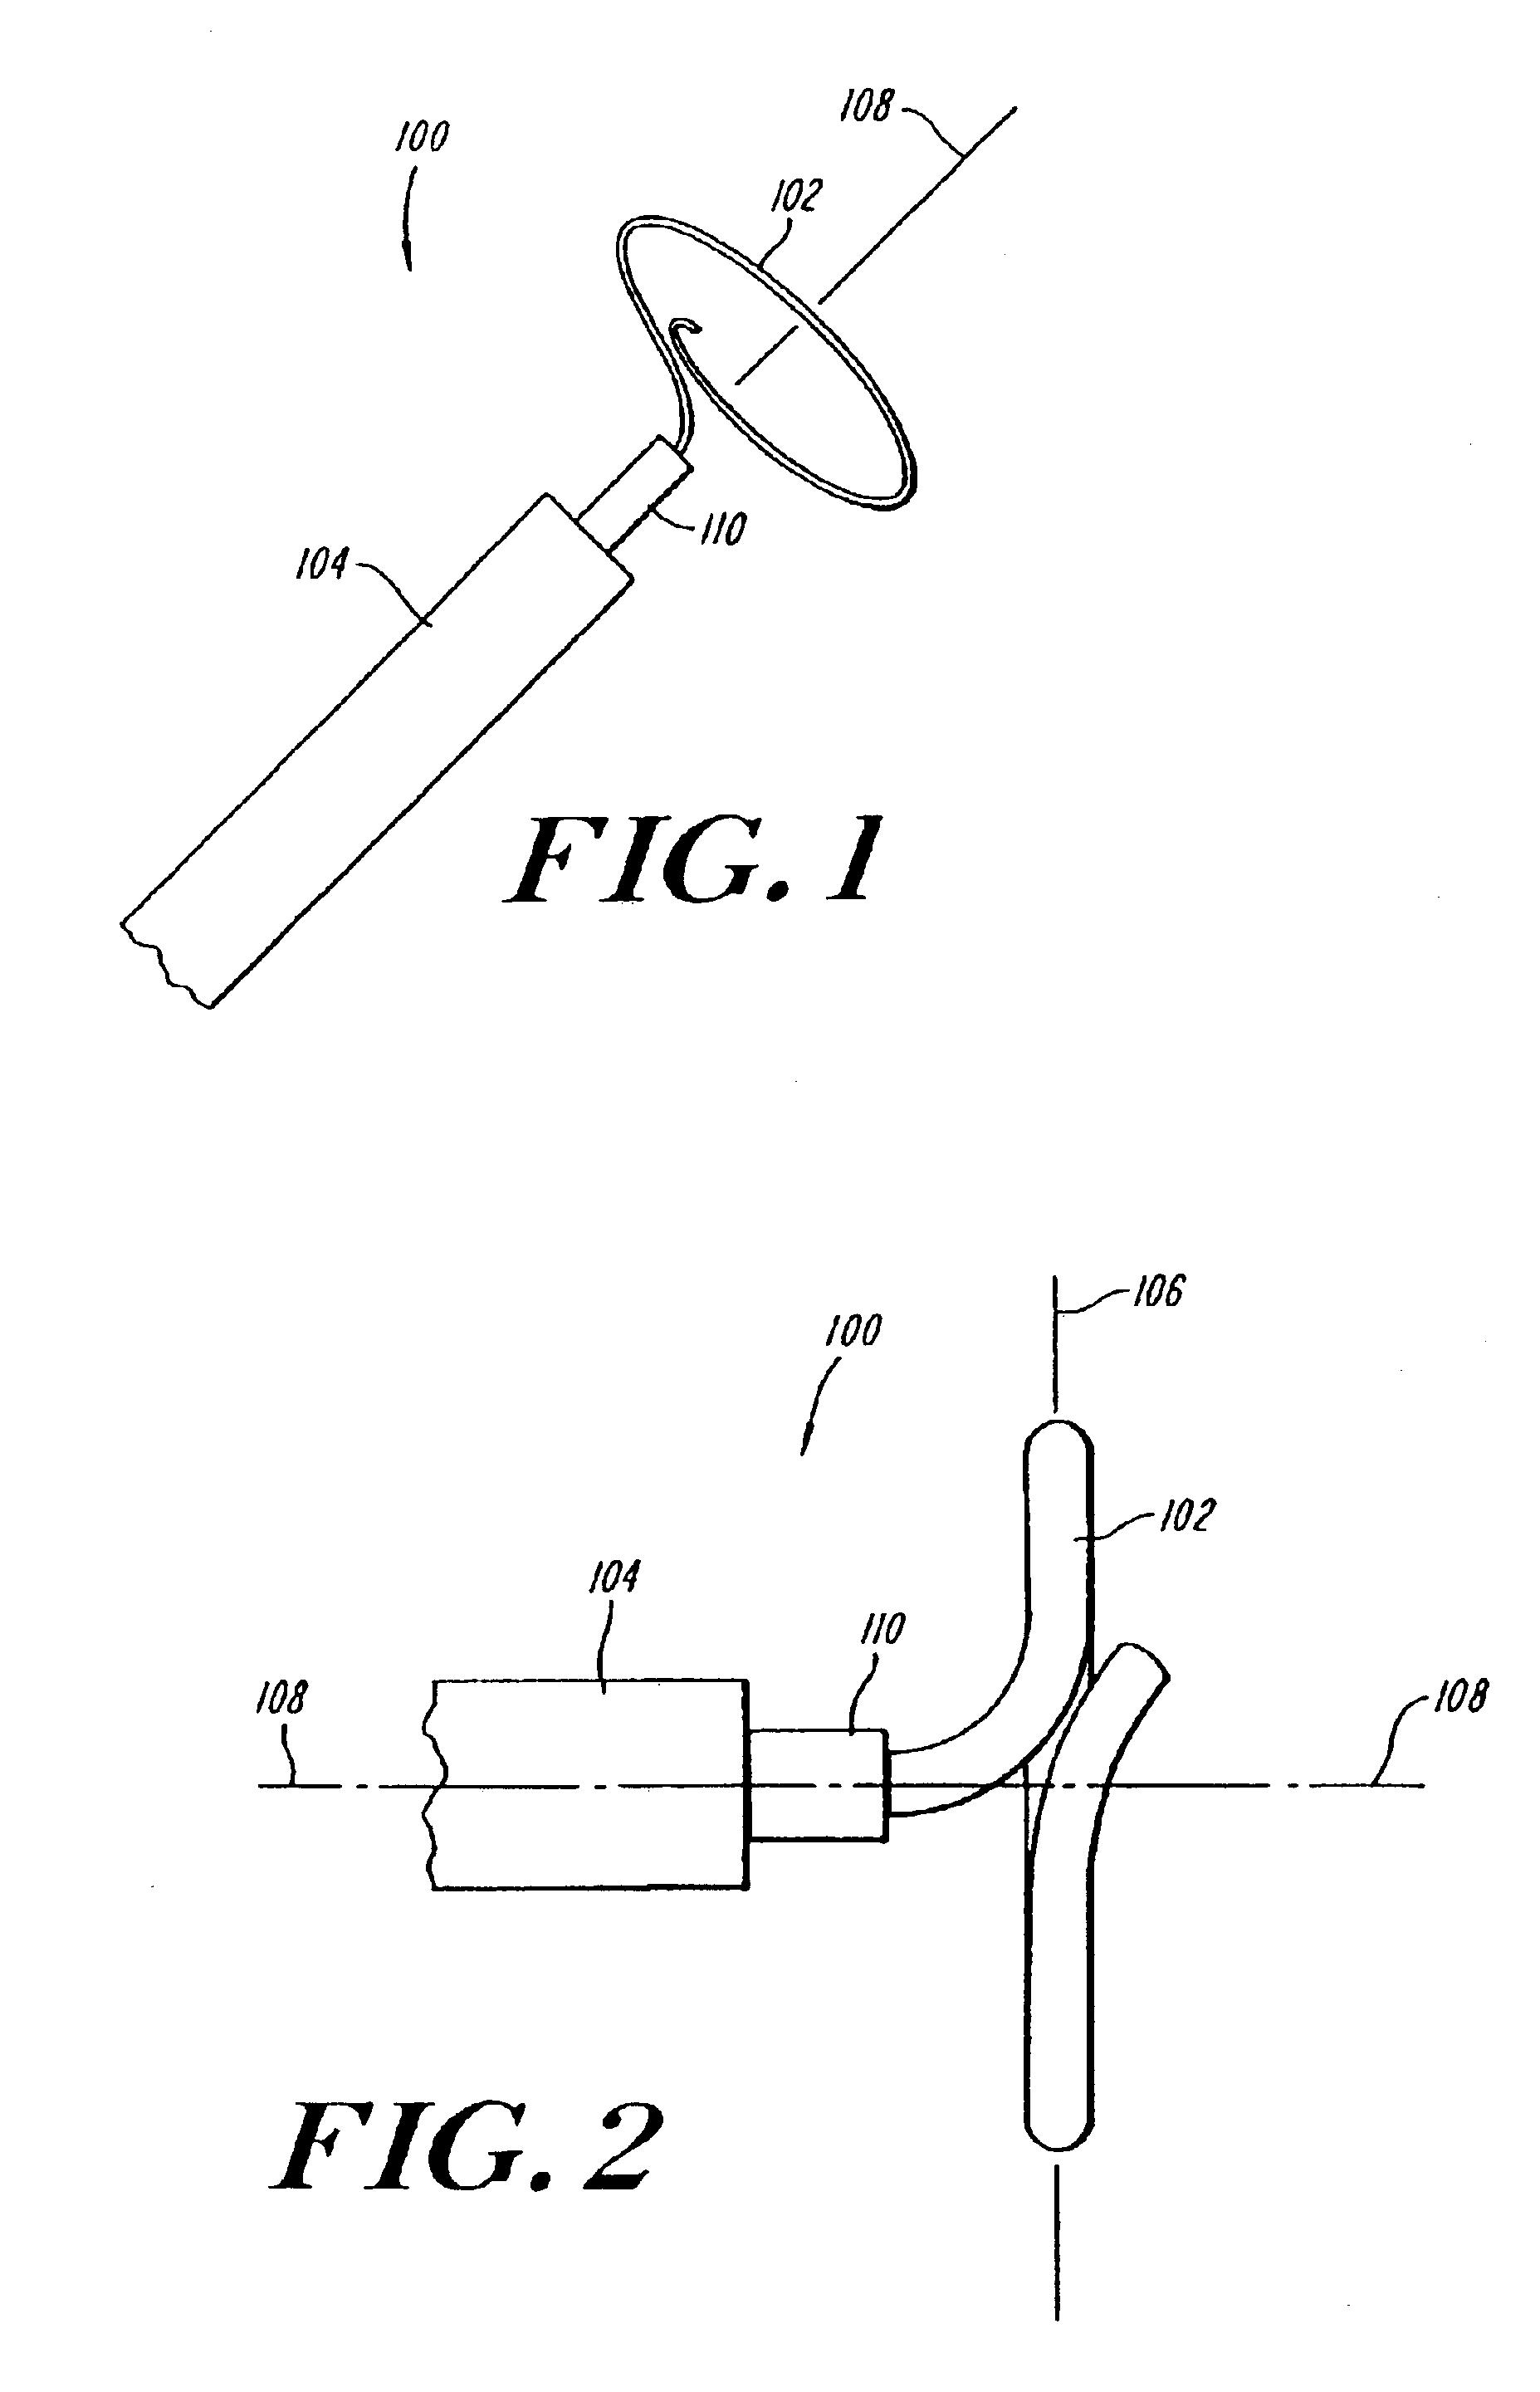 Coiled ablation catheter system